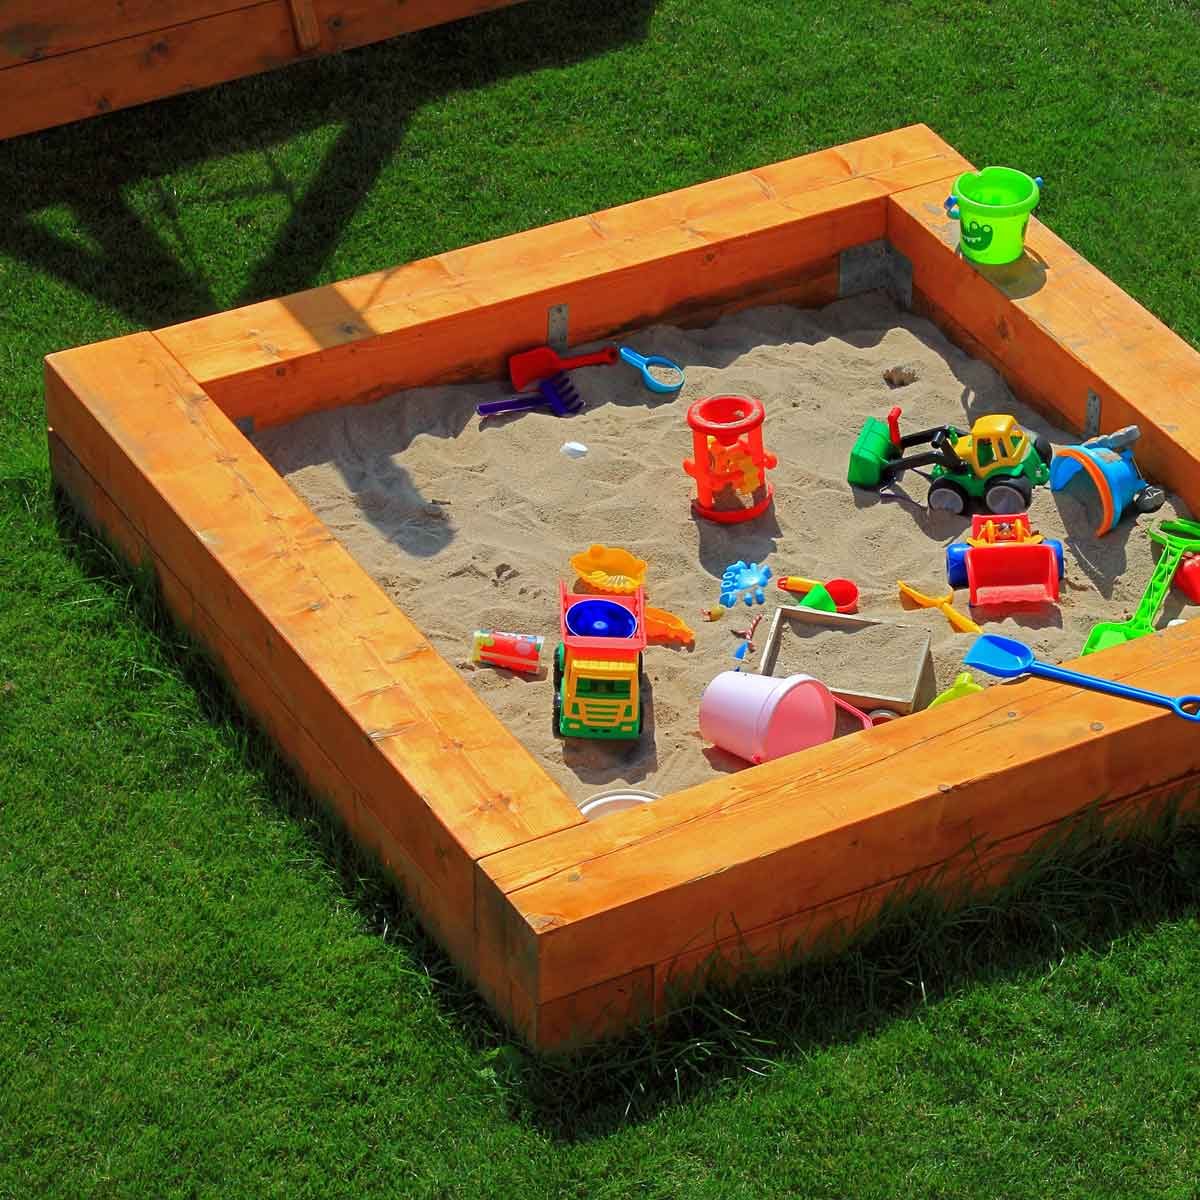 Best Sandbox Covers You Can Buy or Make | The Family Handyman